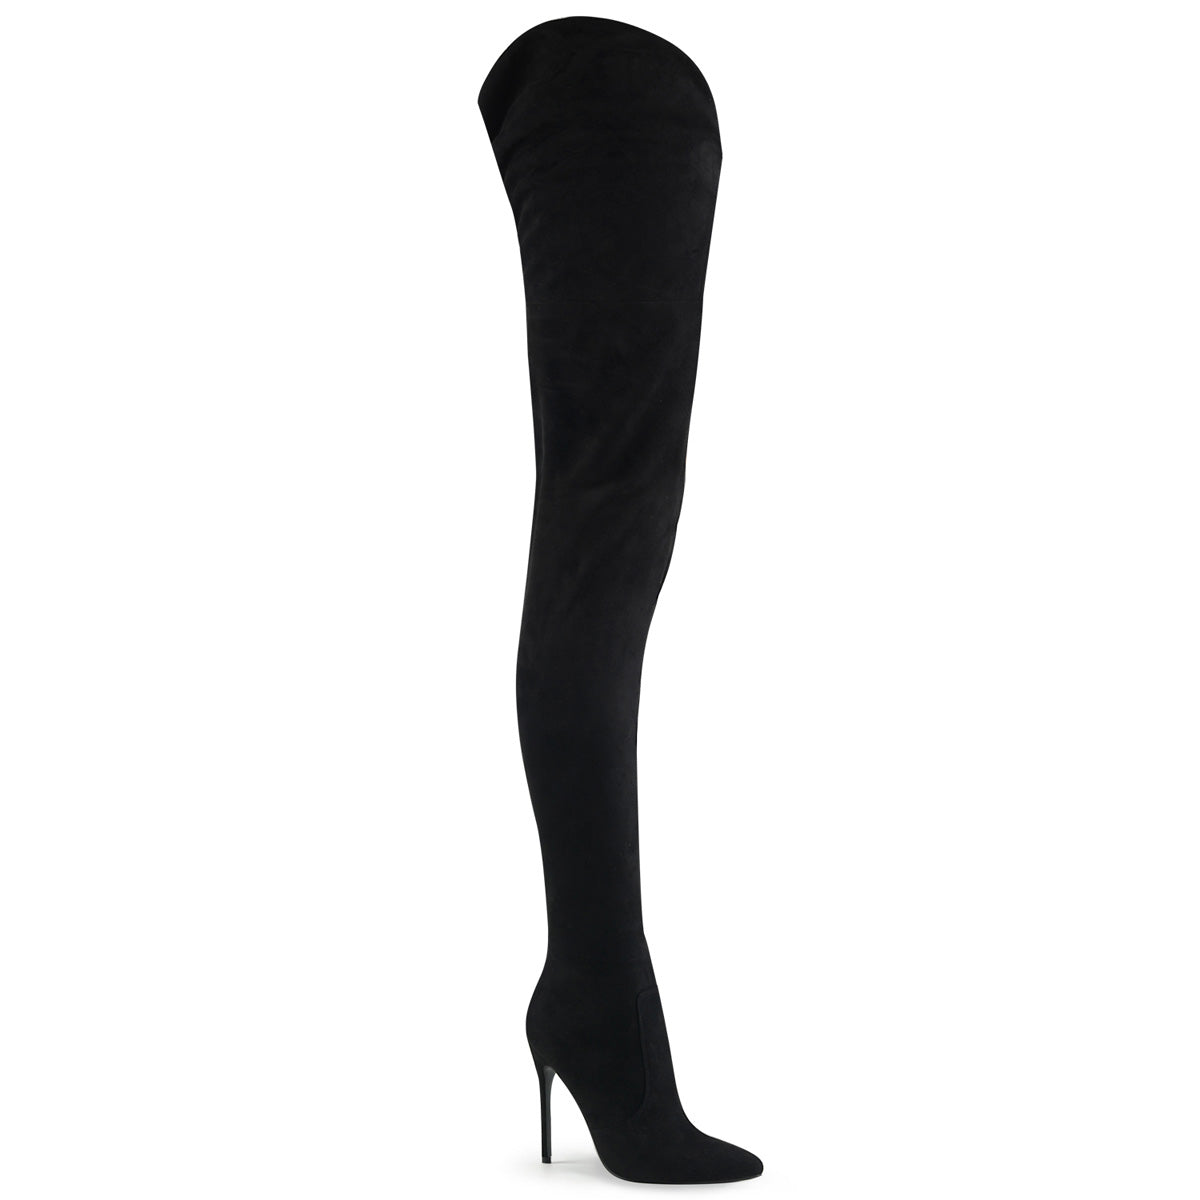 COURTLY-4017 Black Thigh High Boots